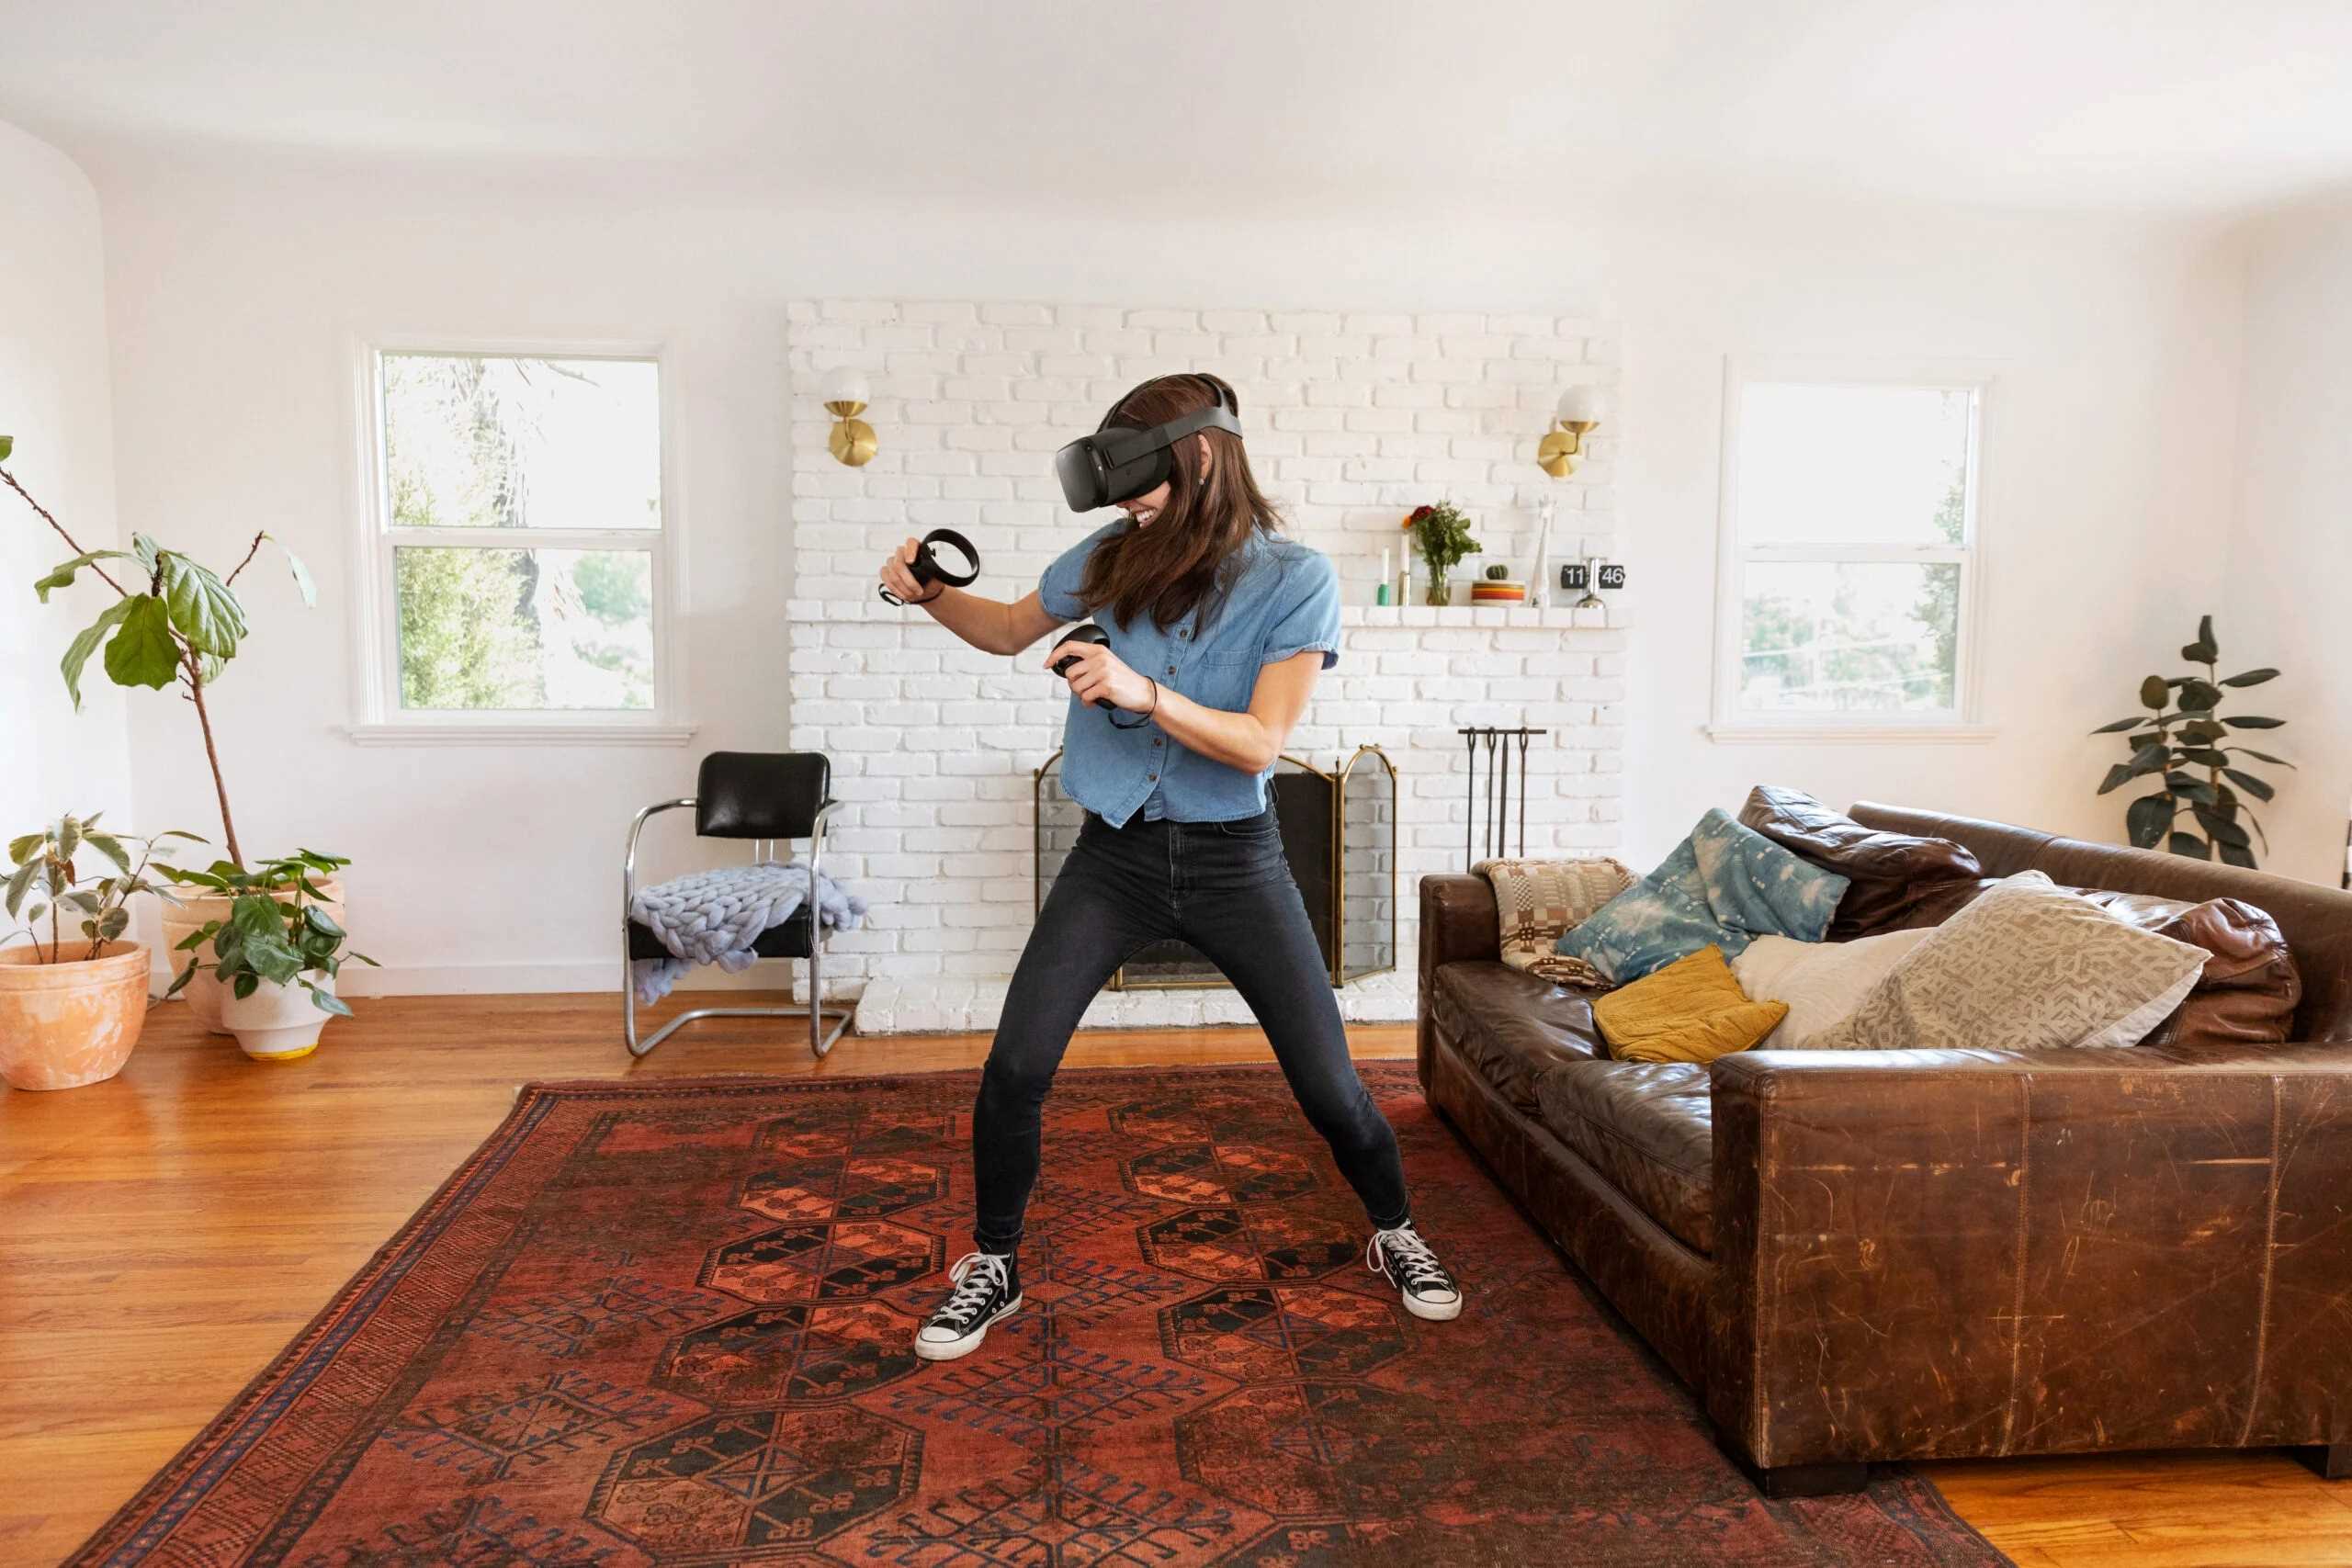 How Do You Set Up Your Room For The Oculus Rift